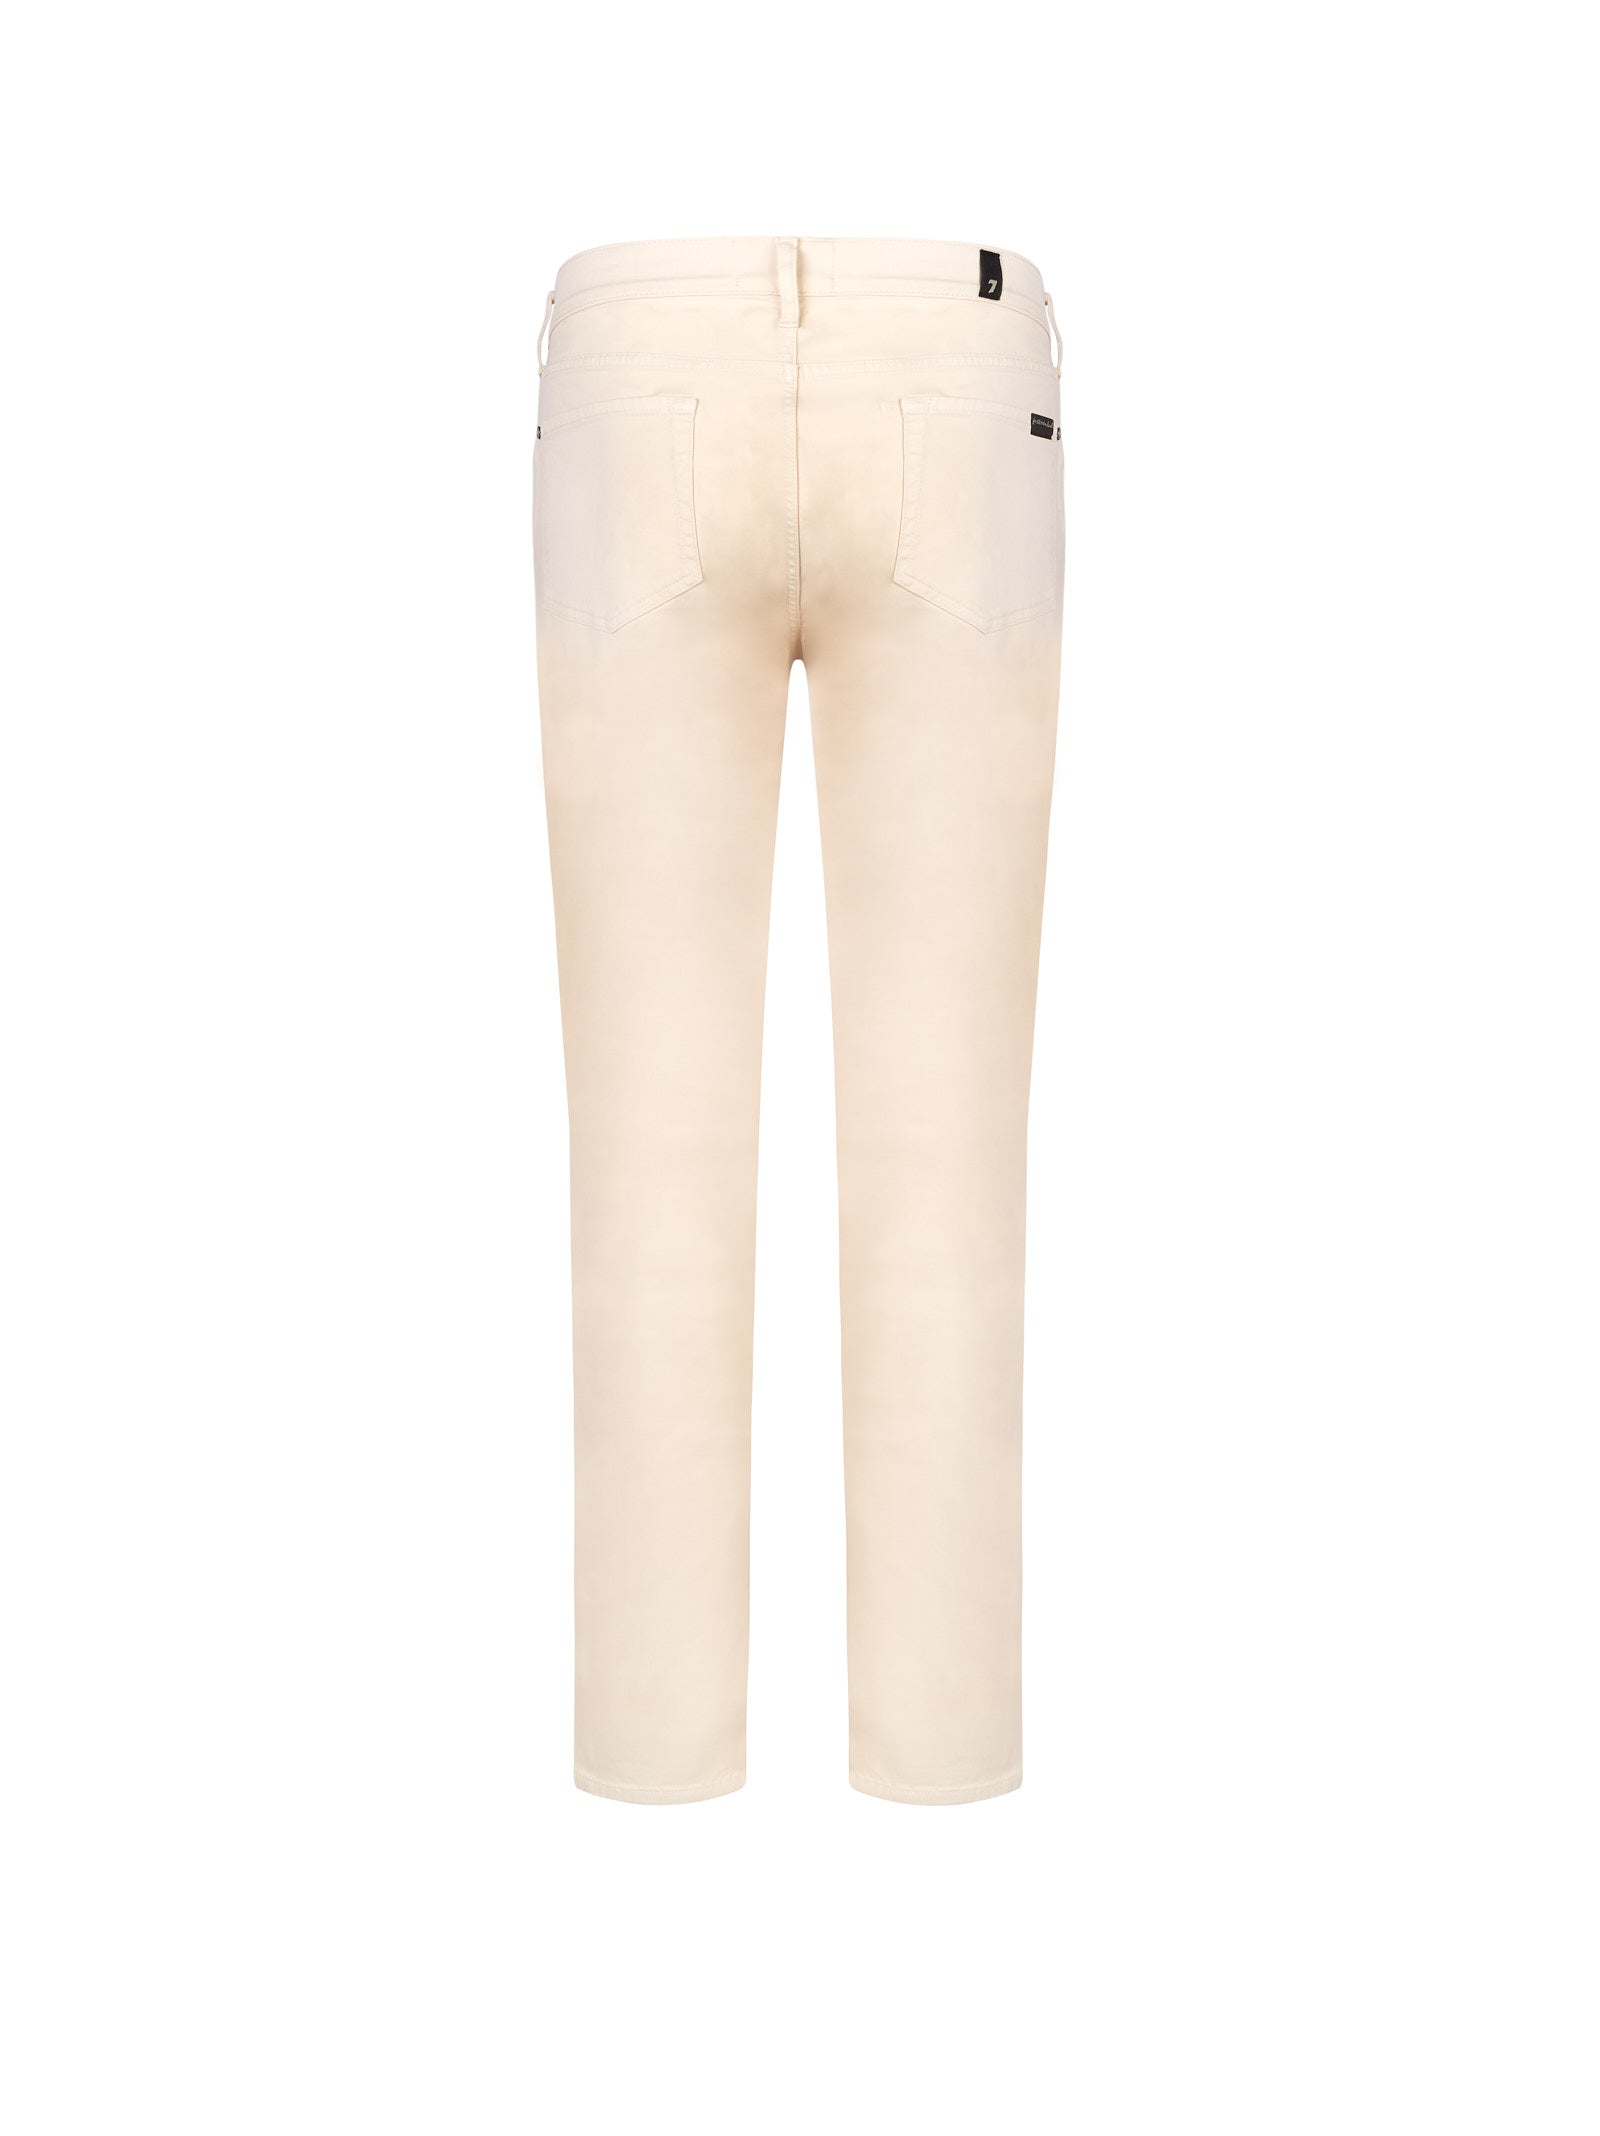 Jeans 7 FOR ALL MANKIND
Bianco